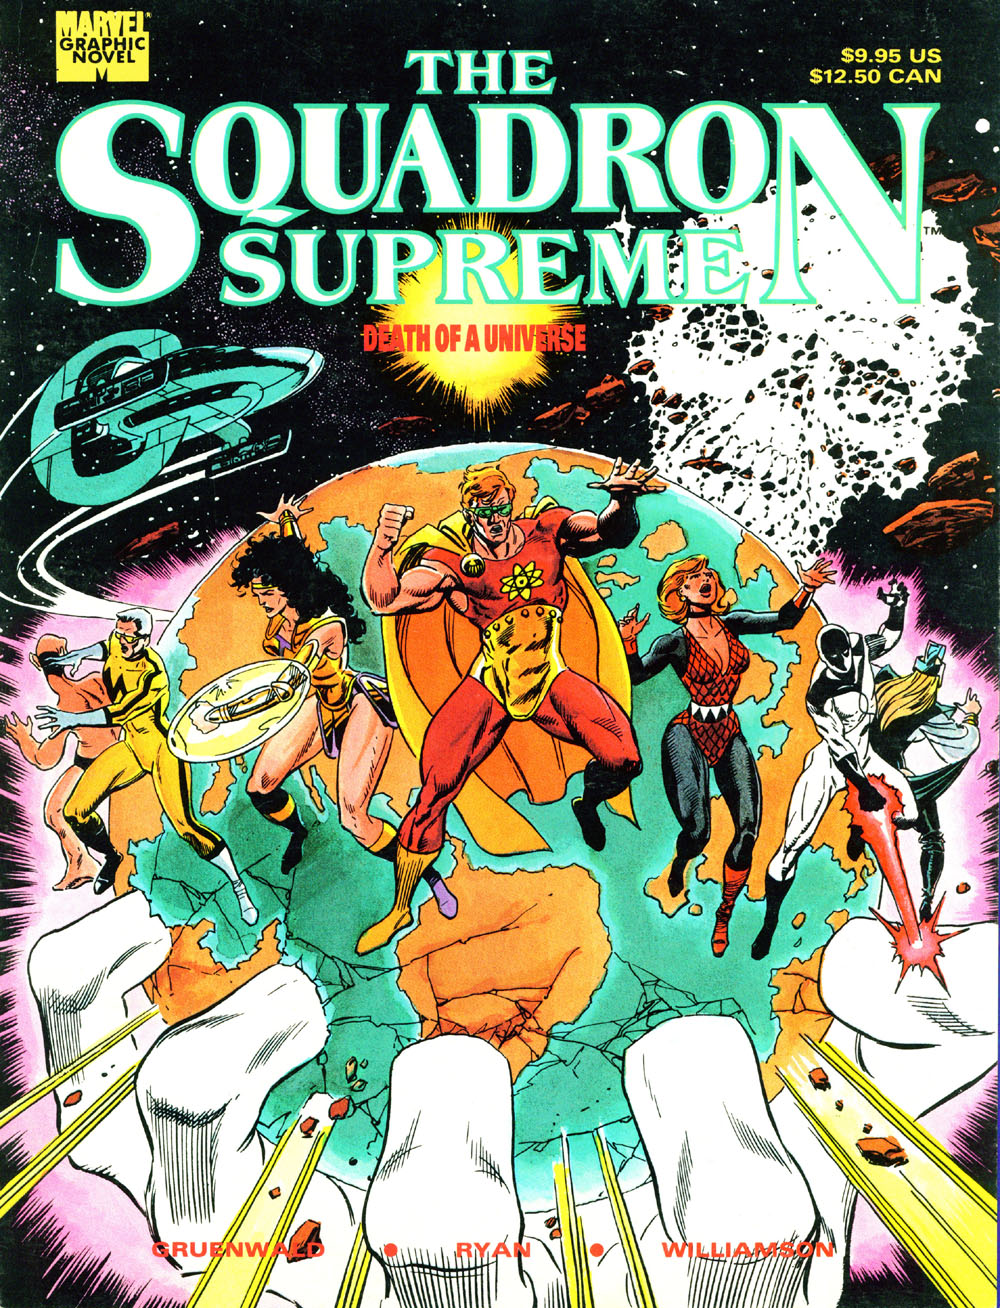 Read online Marvel Graphic Novel comic -  Issue #55 - Squadron Supreme - Death of a Universe - 1